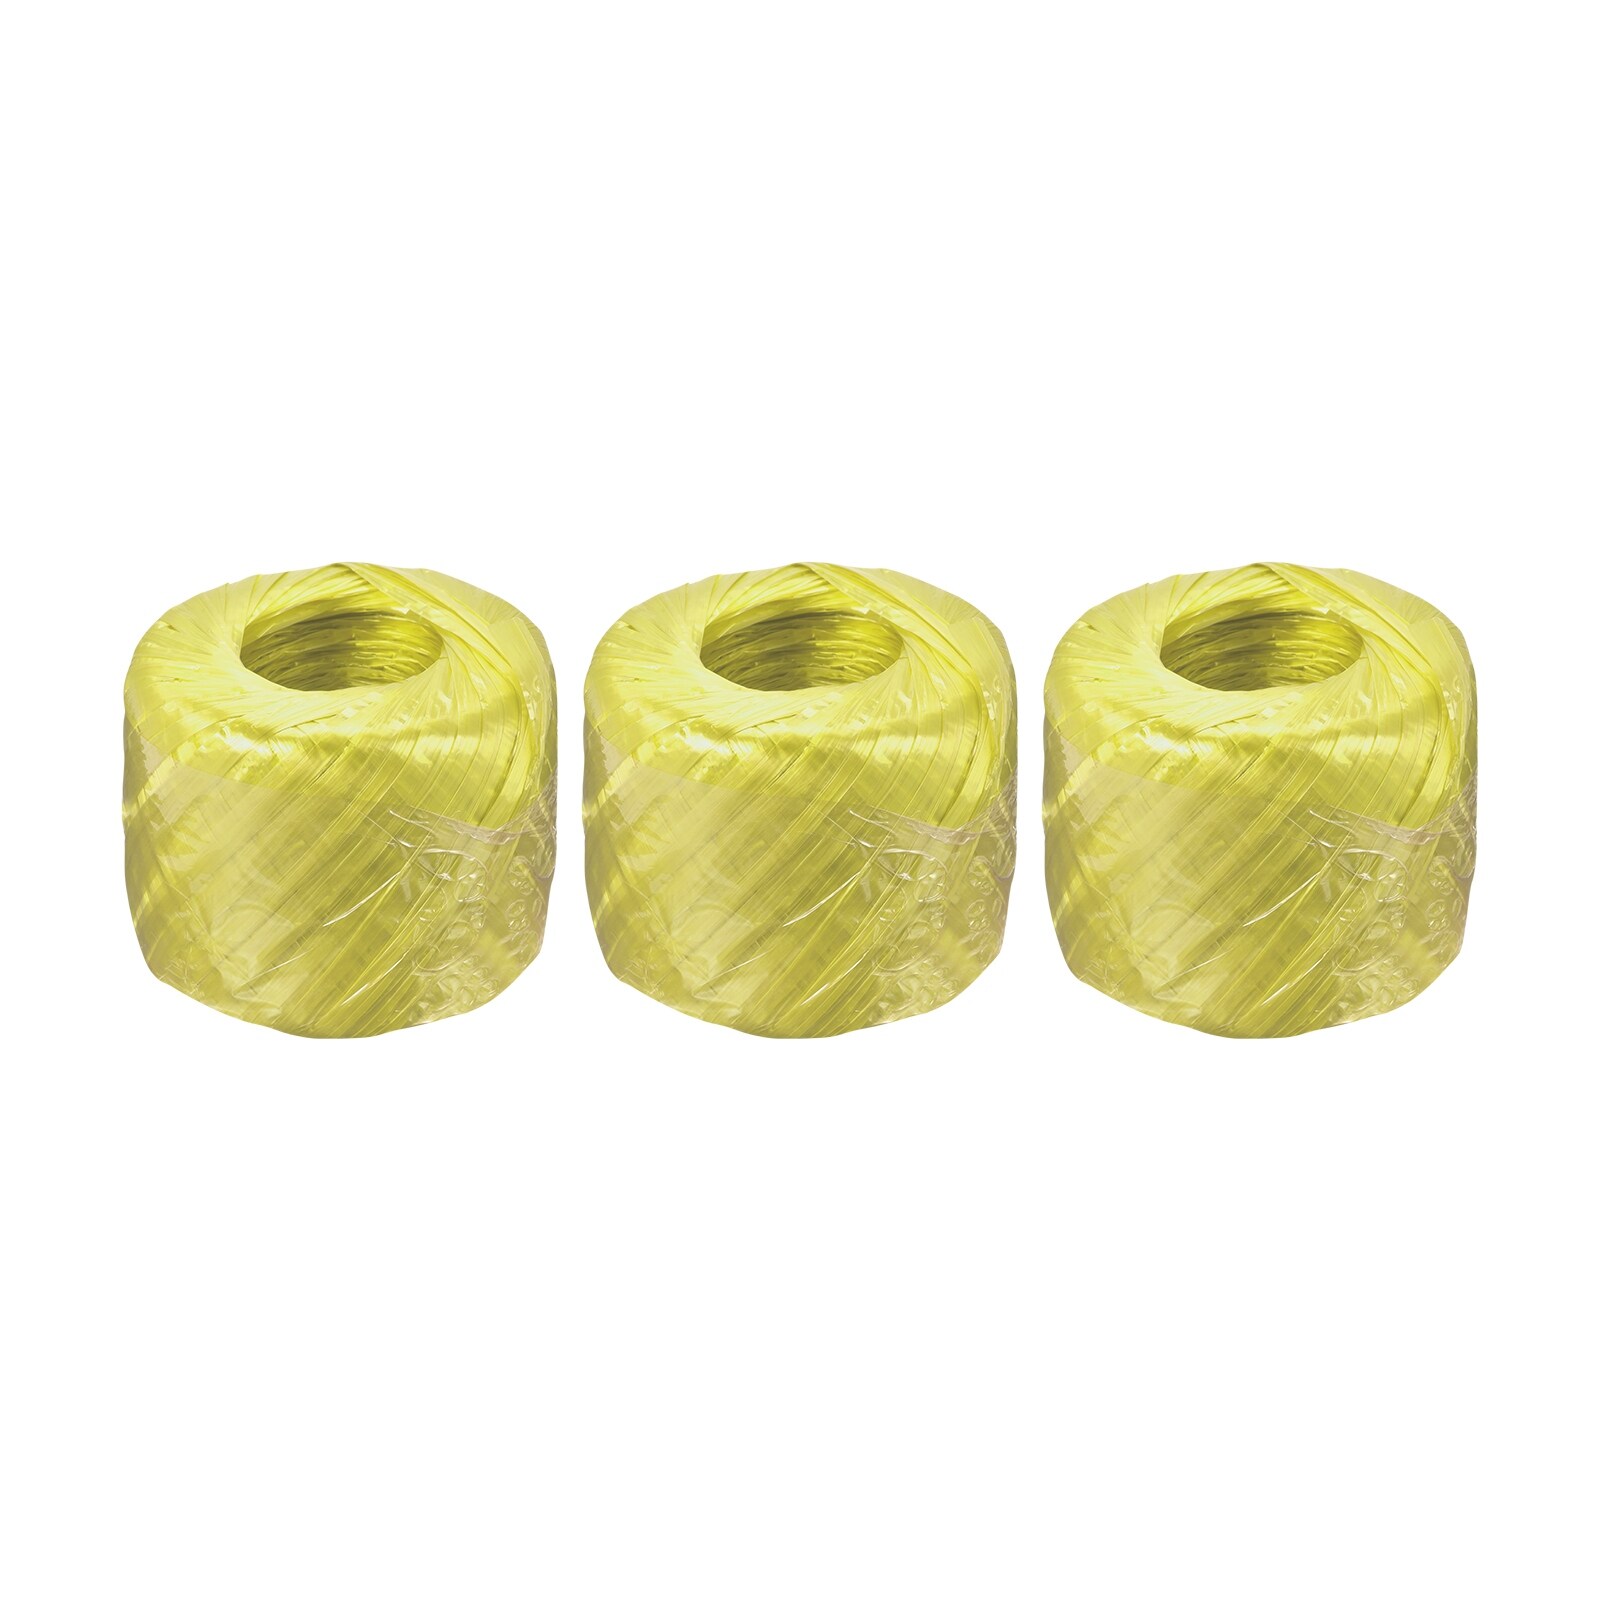 Polyester Nylon Plastic Rope Twine Bundled for Packing ,100m Yellow 3Pcs -  Bed Bath & Beyond - 36680806